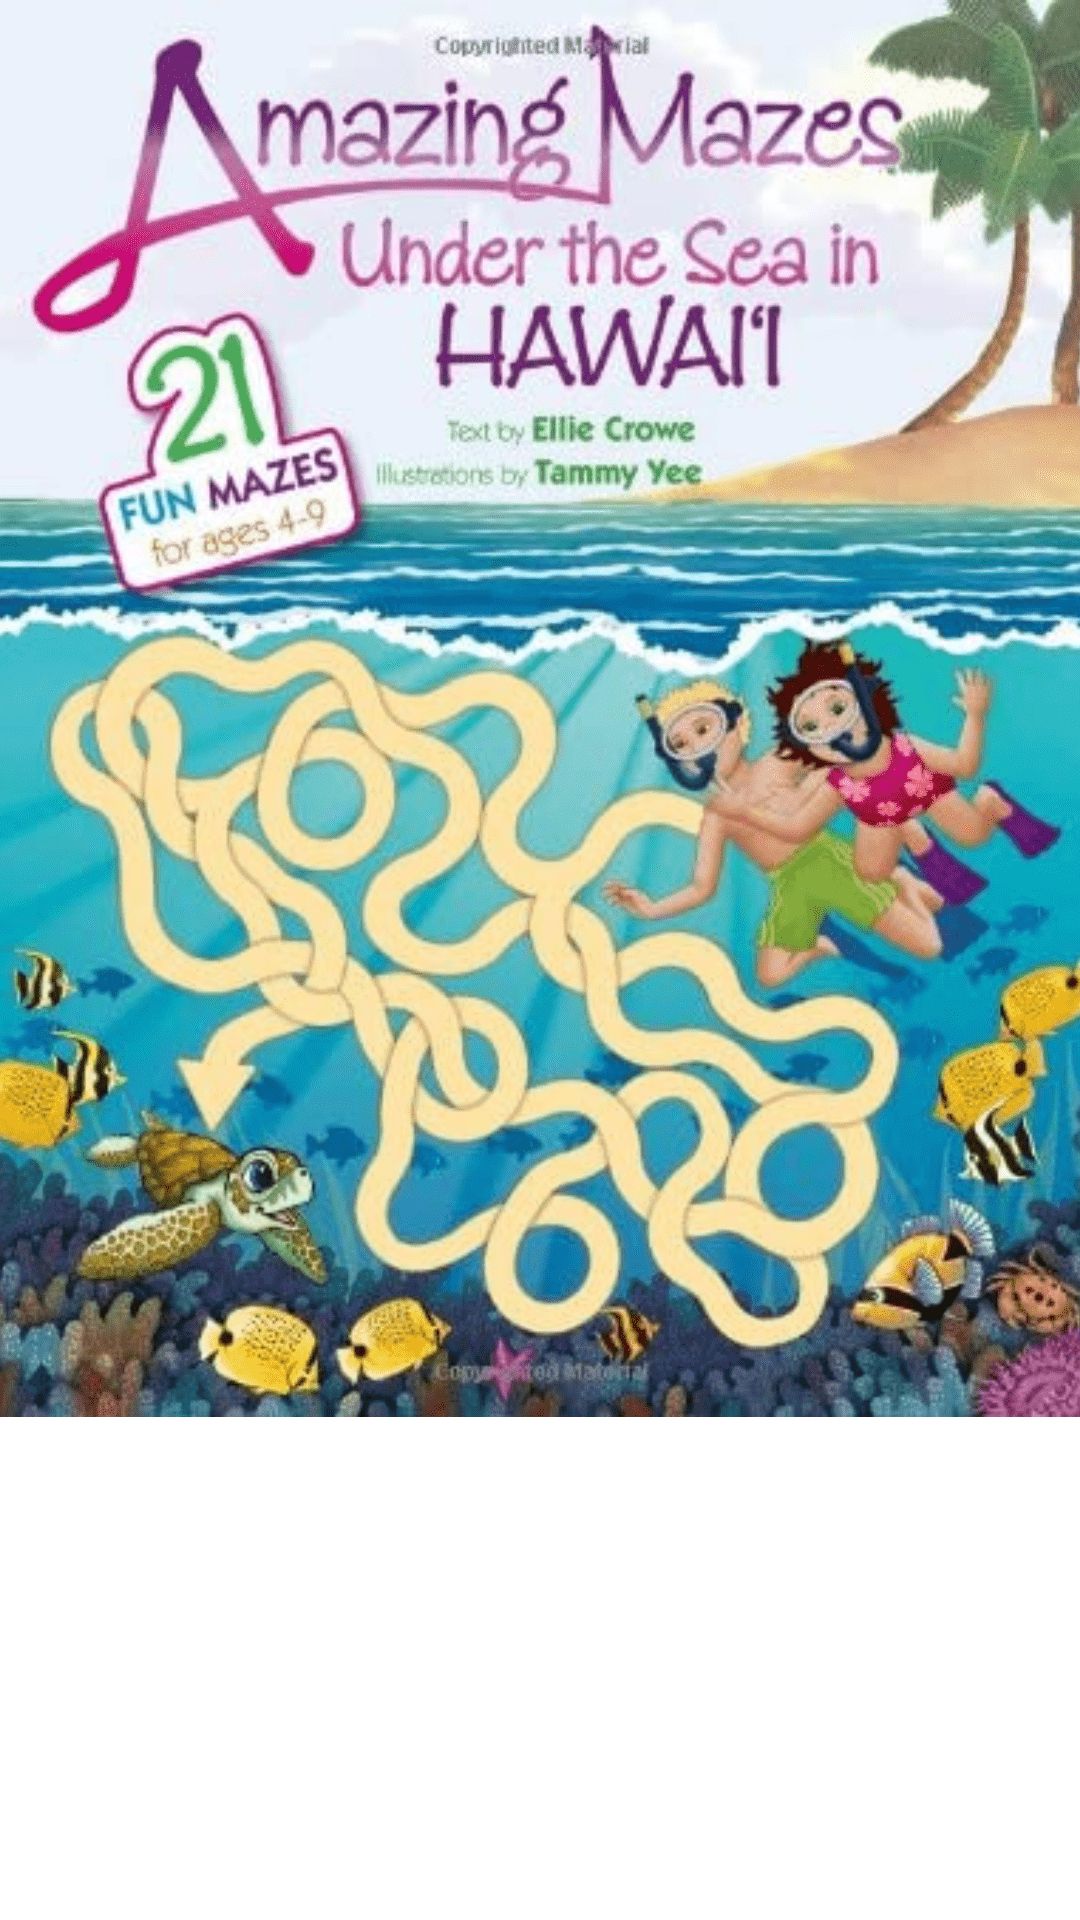 Amazing Mazes Under the Sea in Hawaii